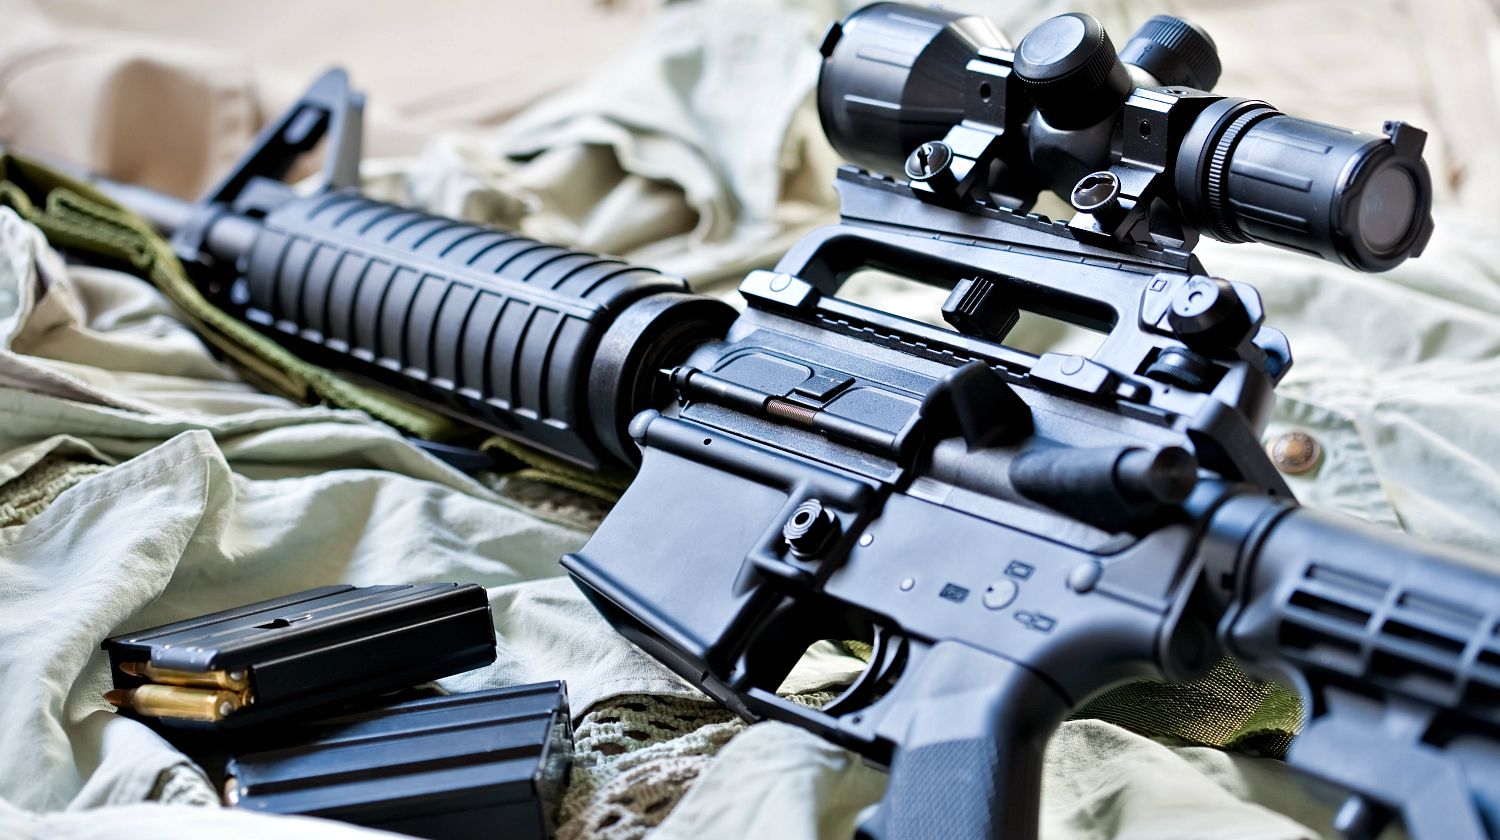 Feature | AR-15 rifle and magazines with ammo | AR-15 Basics: A Guide To The AR-15 Platform